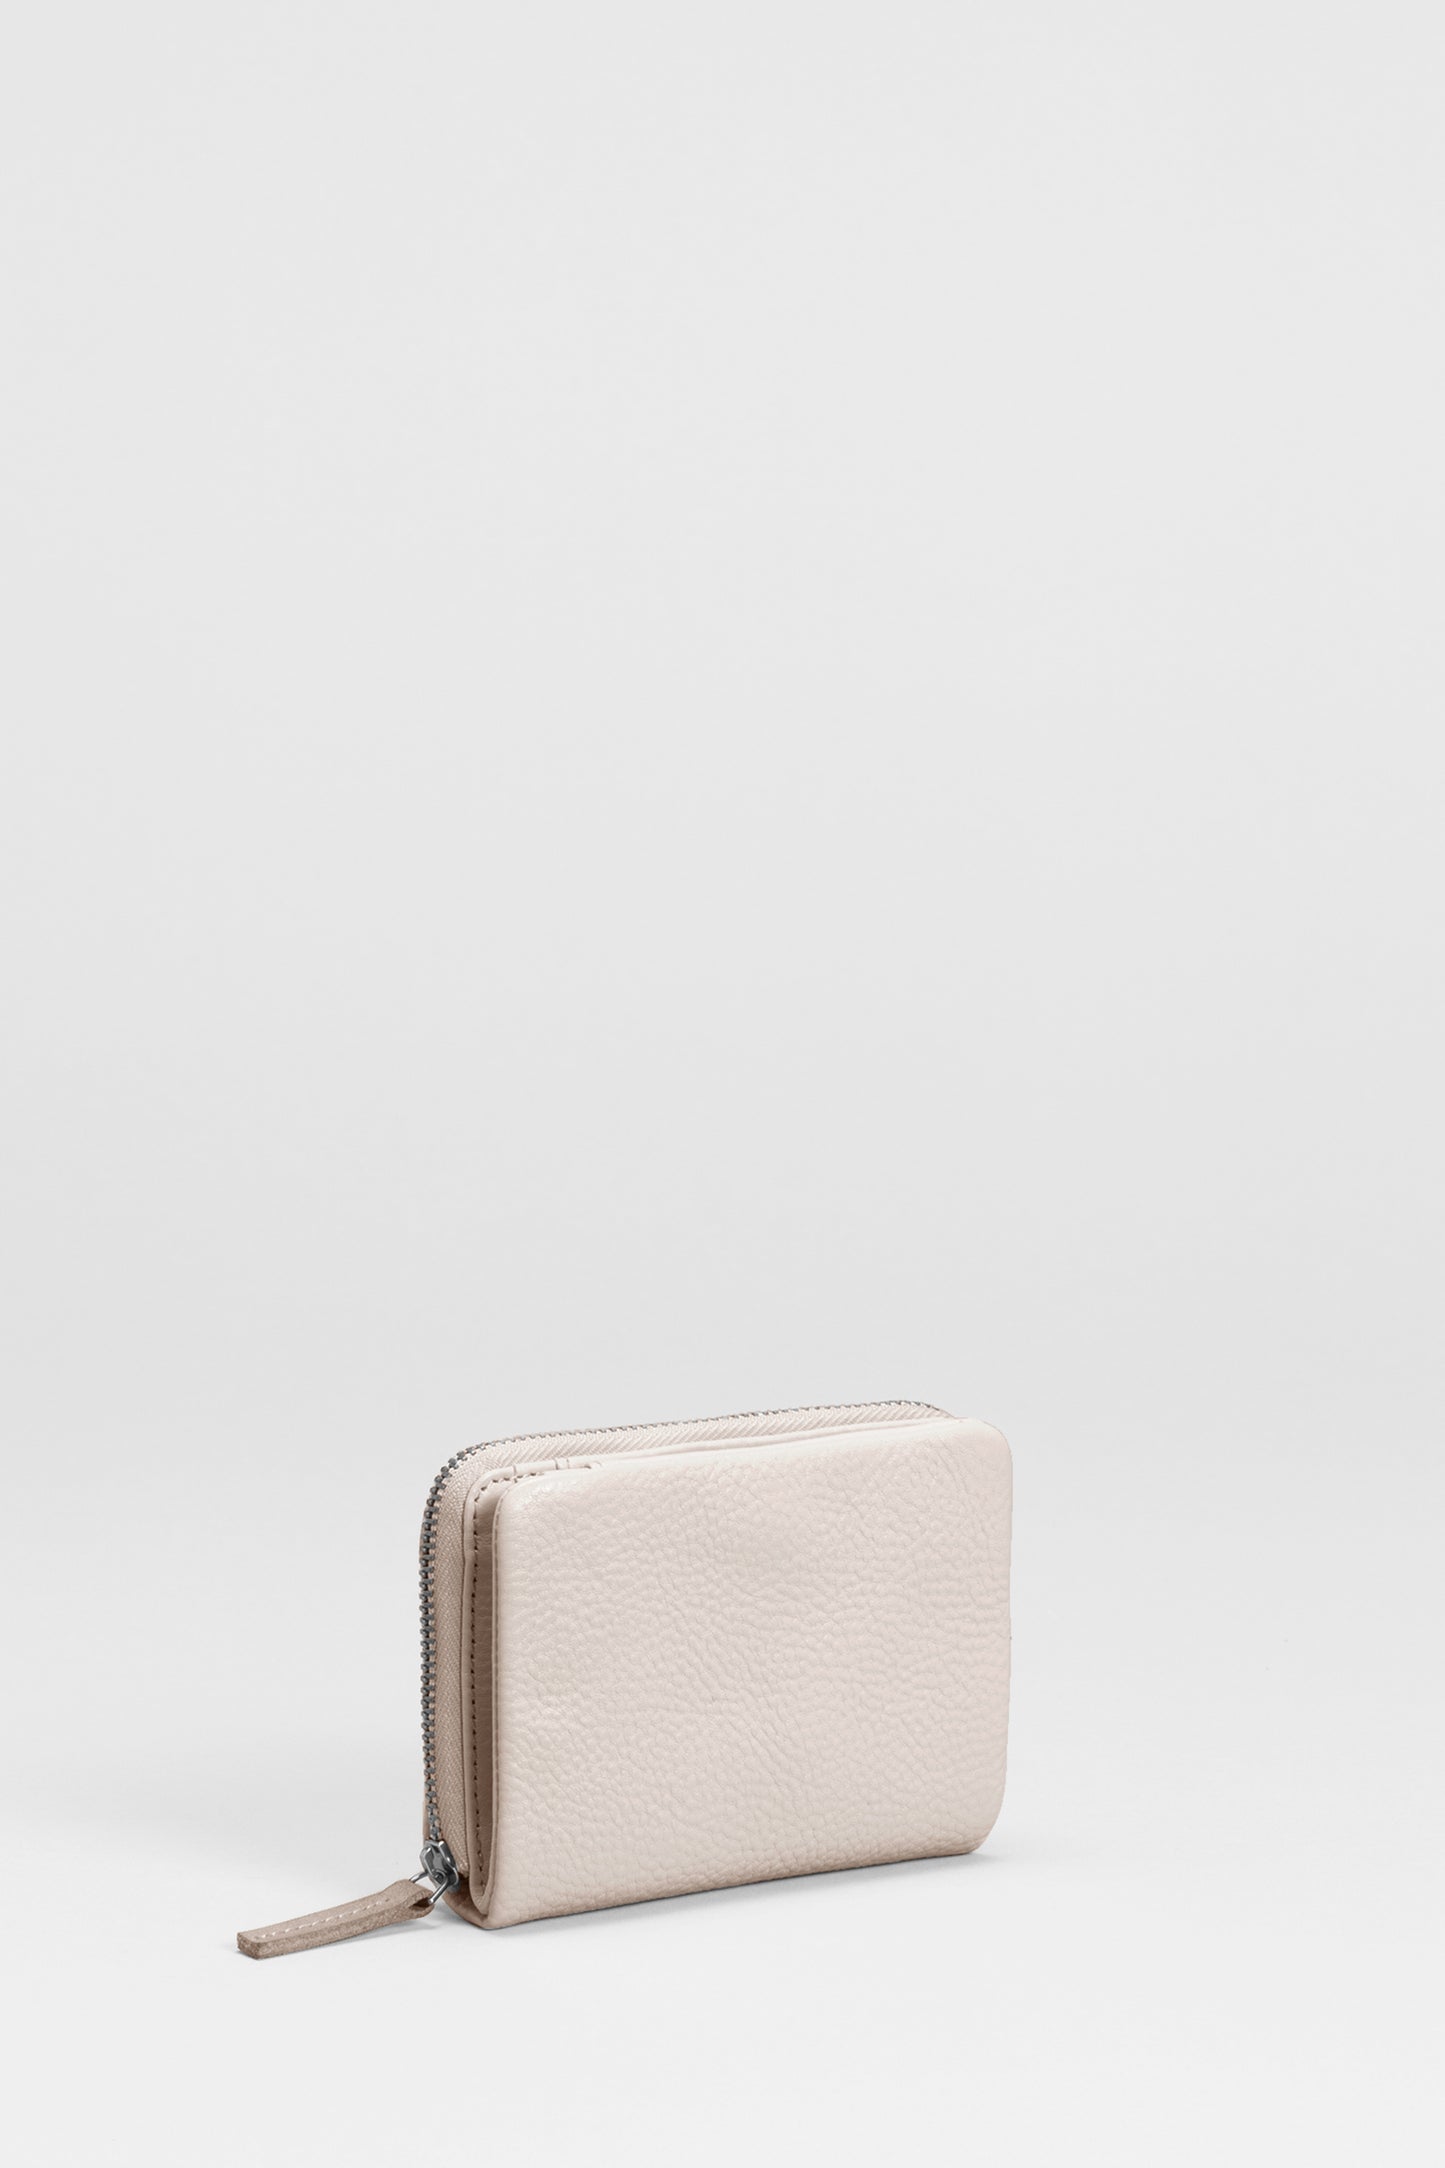 Canutte Leather Wallet Front | BLANC / NATURAL